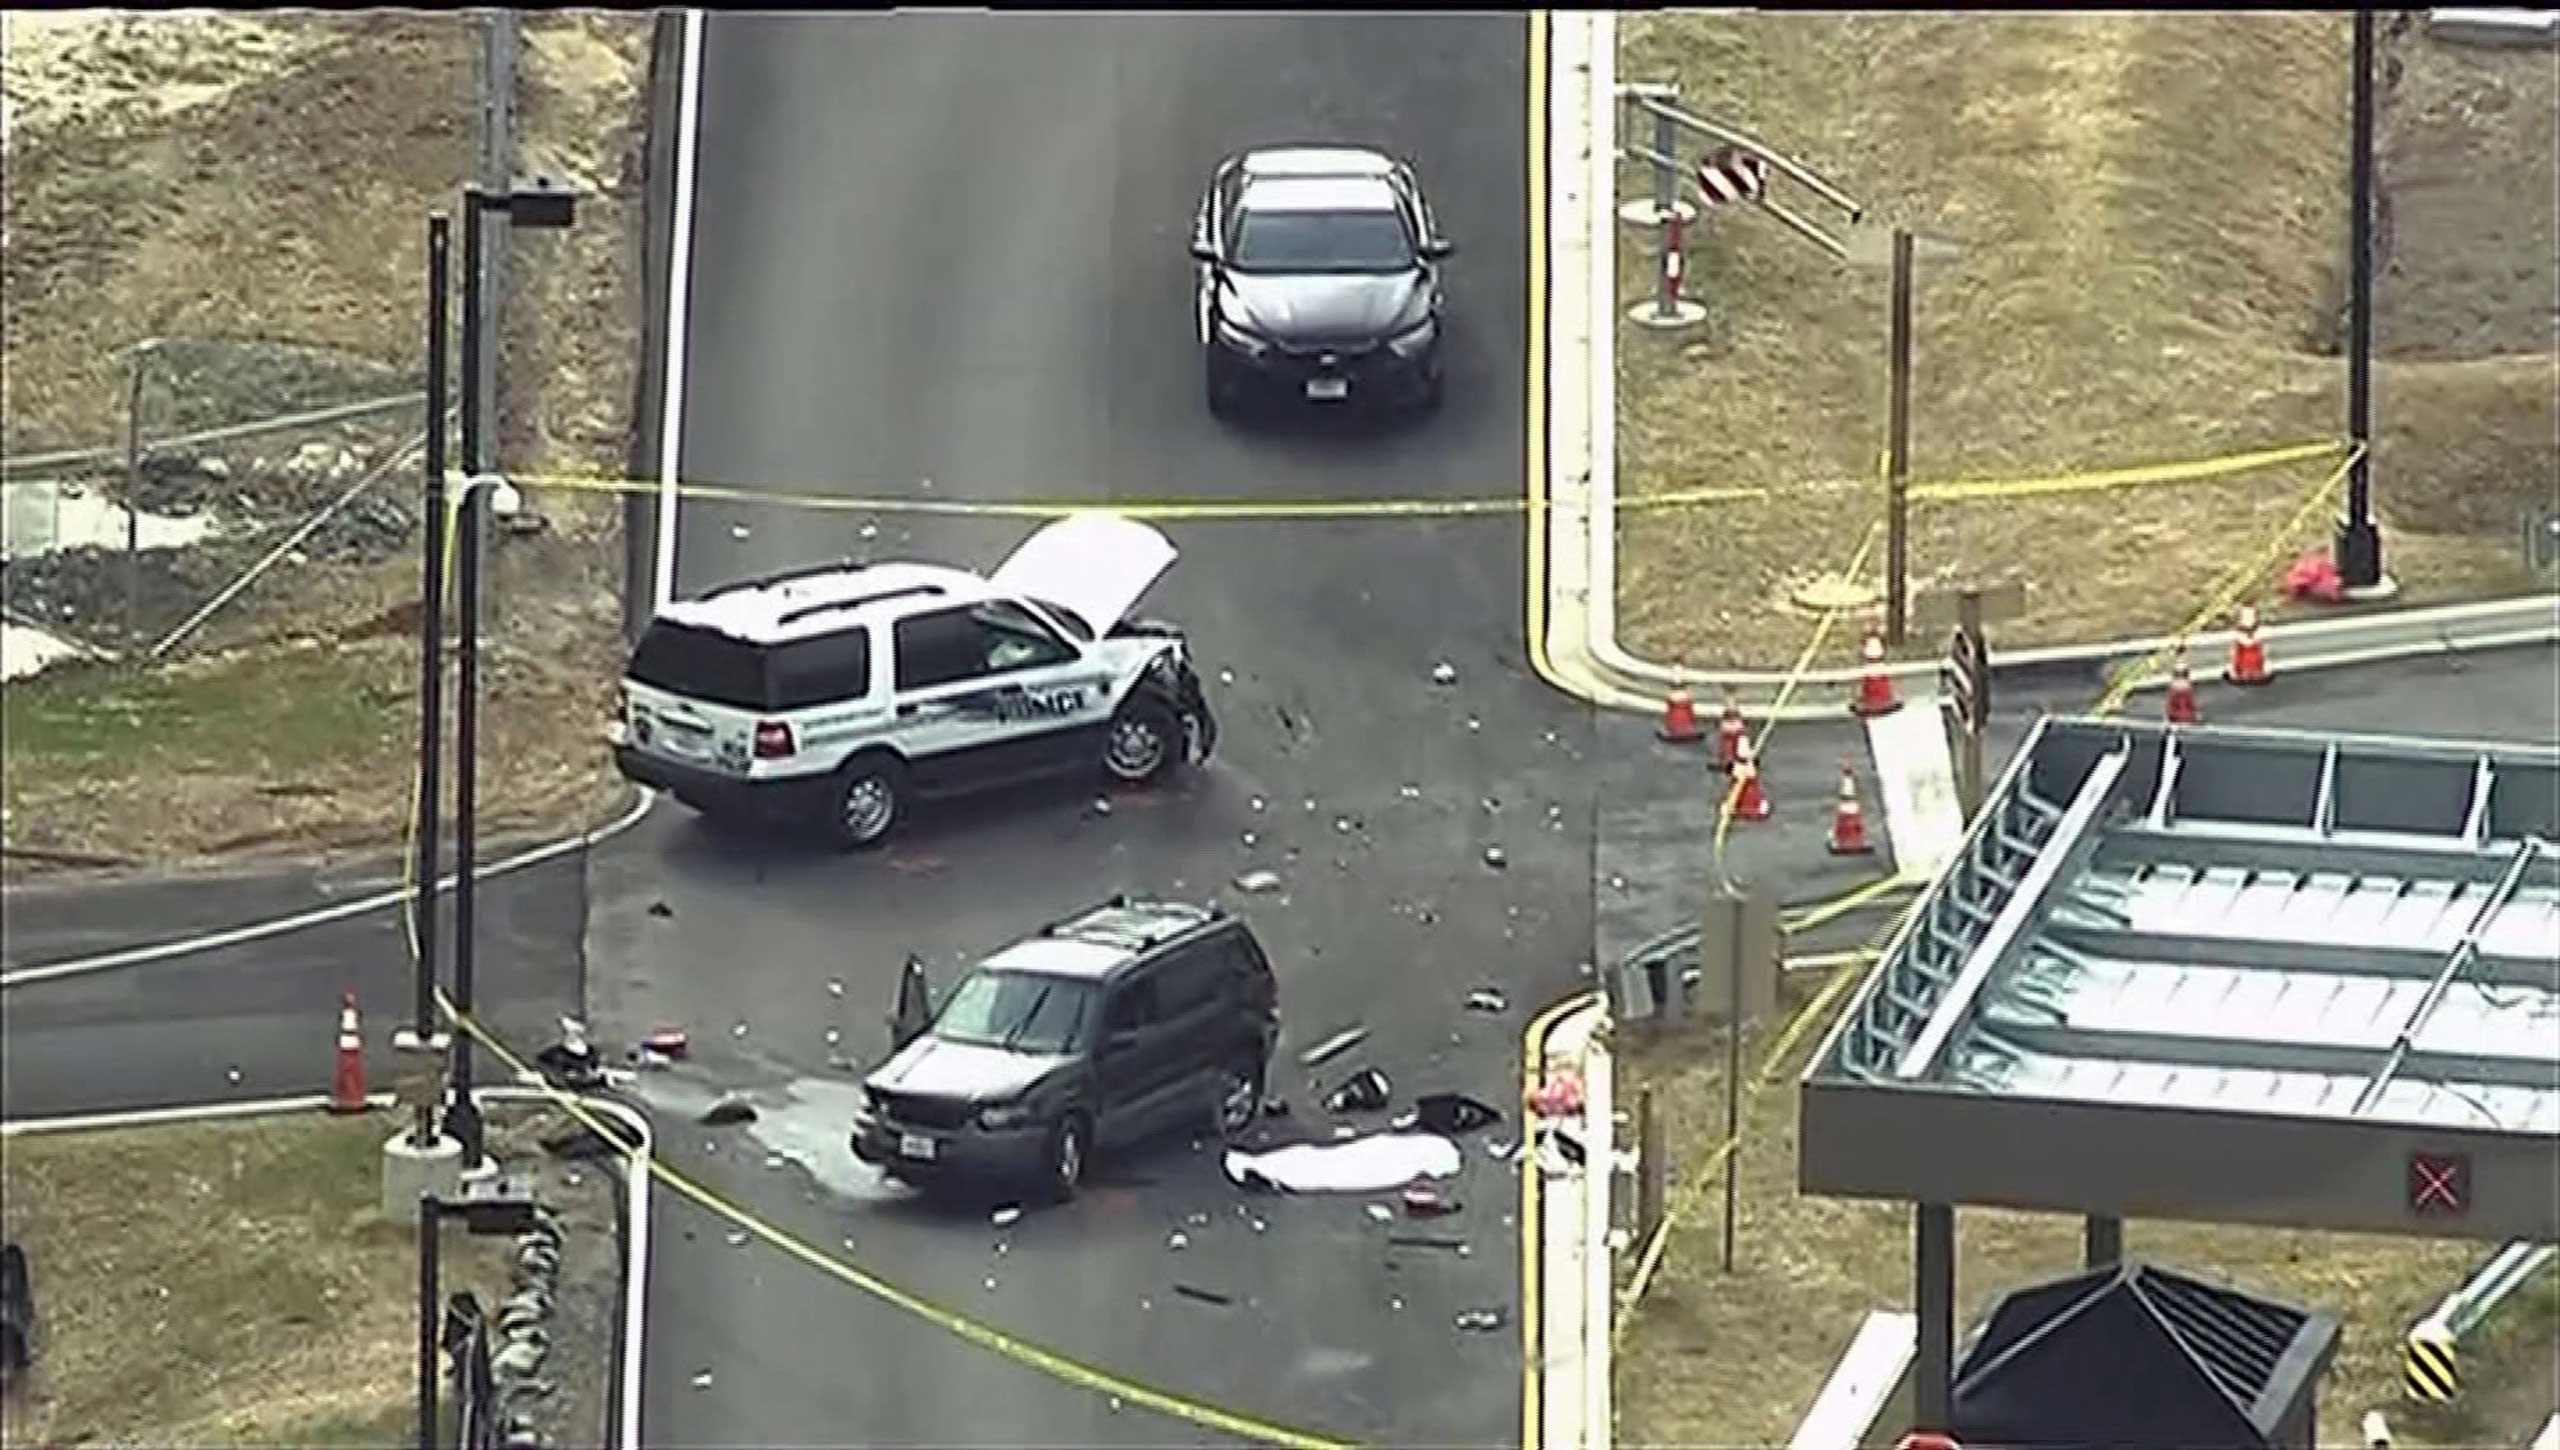 An aerial view of a shooting scene at the National Security Agency at Fort Meade in Maryland is pictured in this still image take from video, March 30, 2015. (NBC 4 Washington—Reuters)